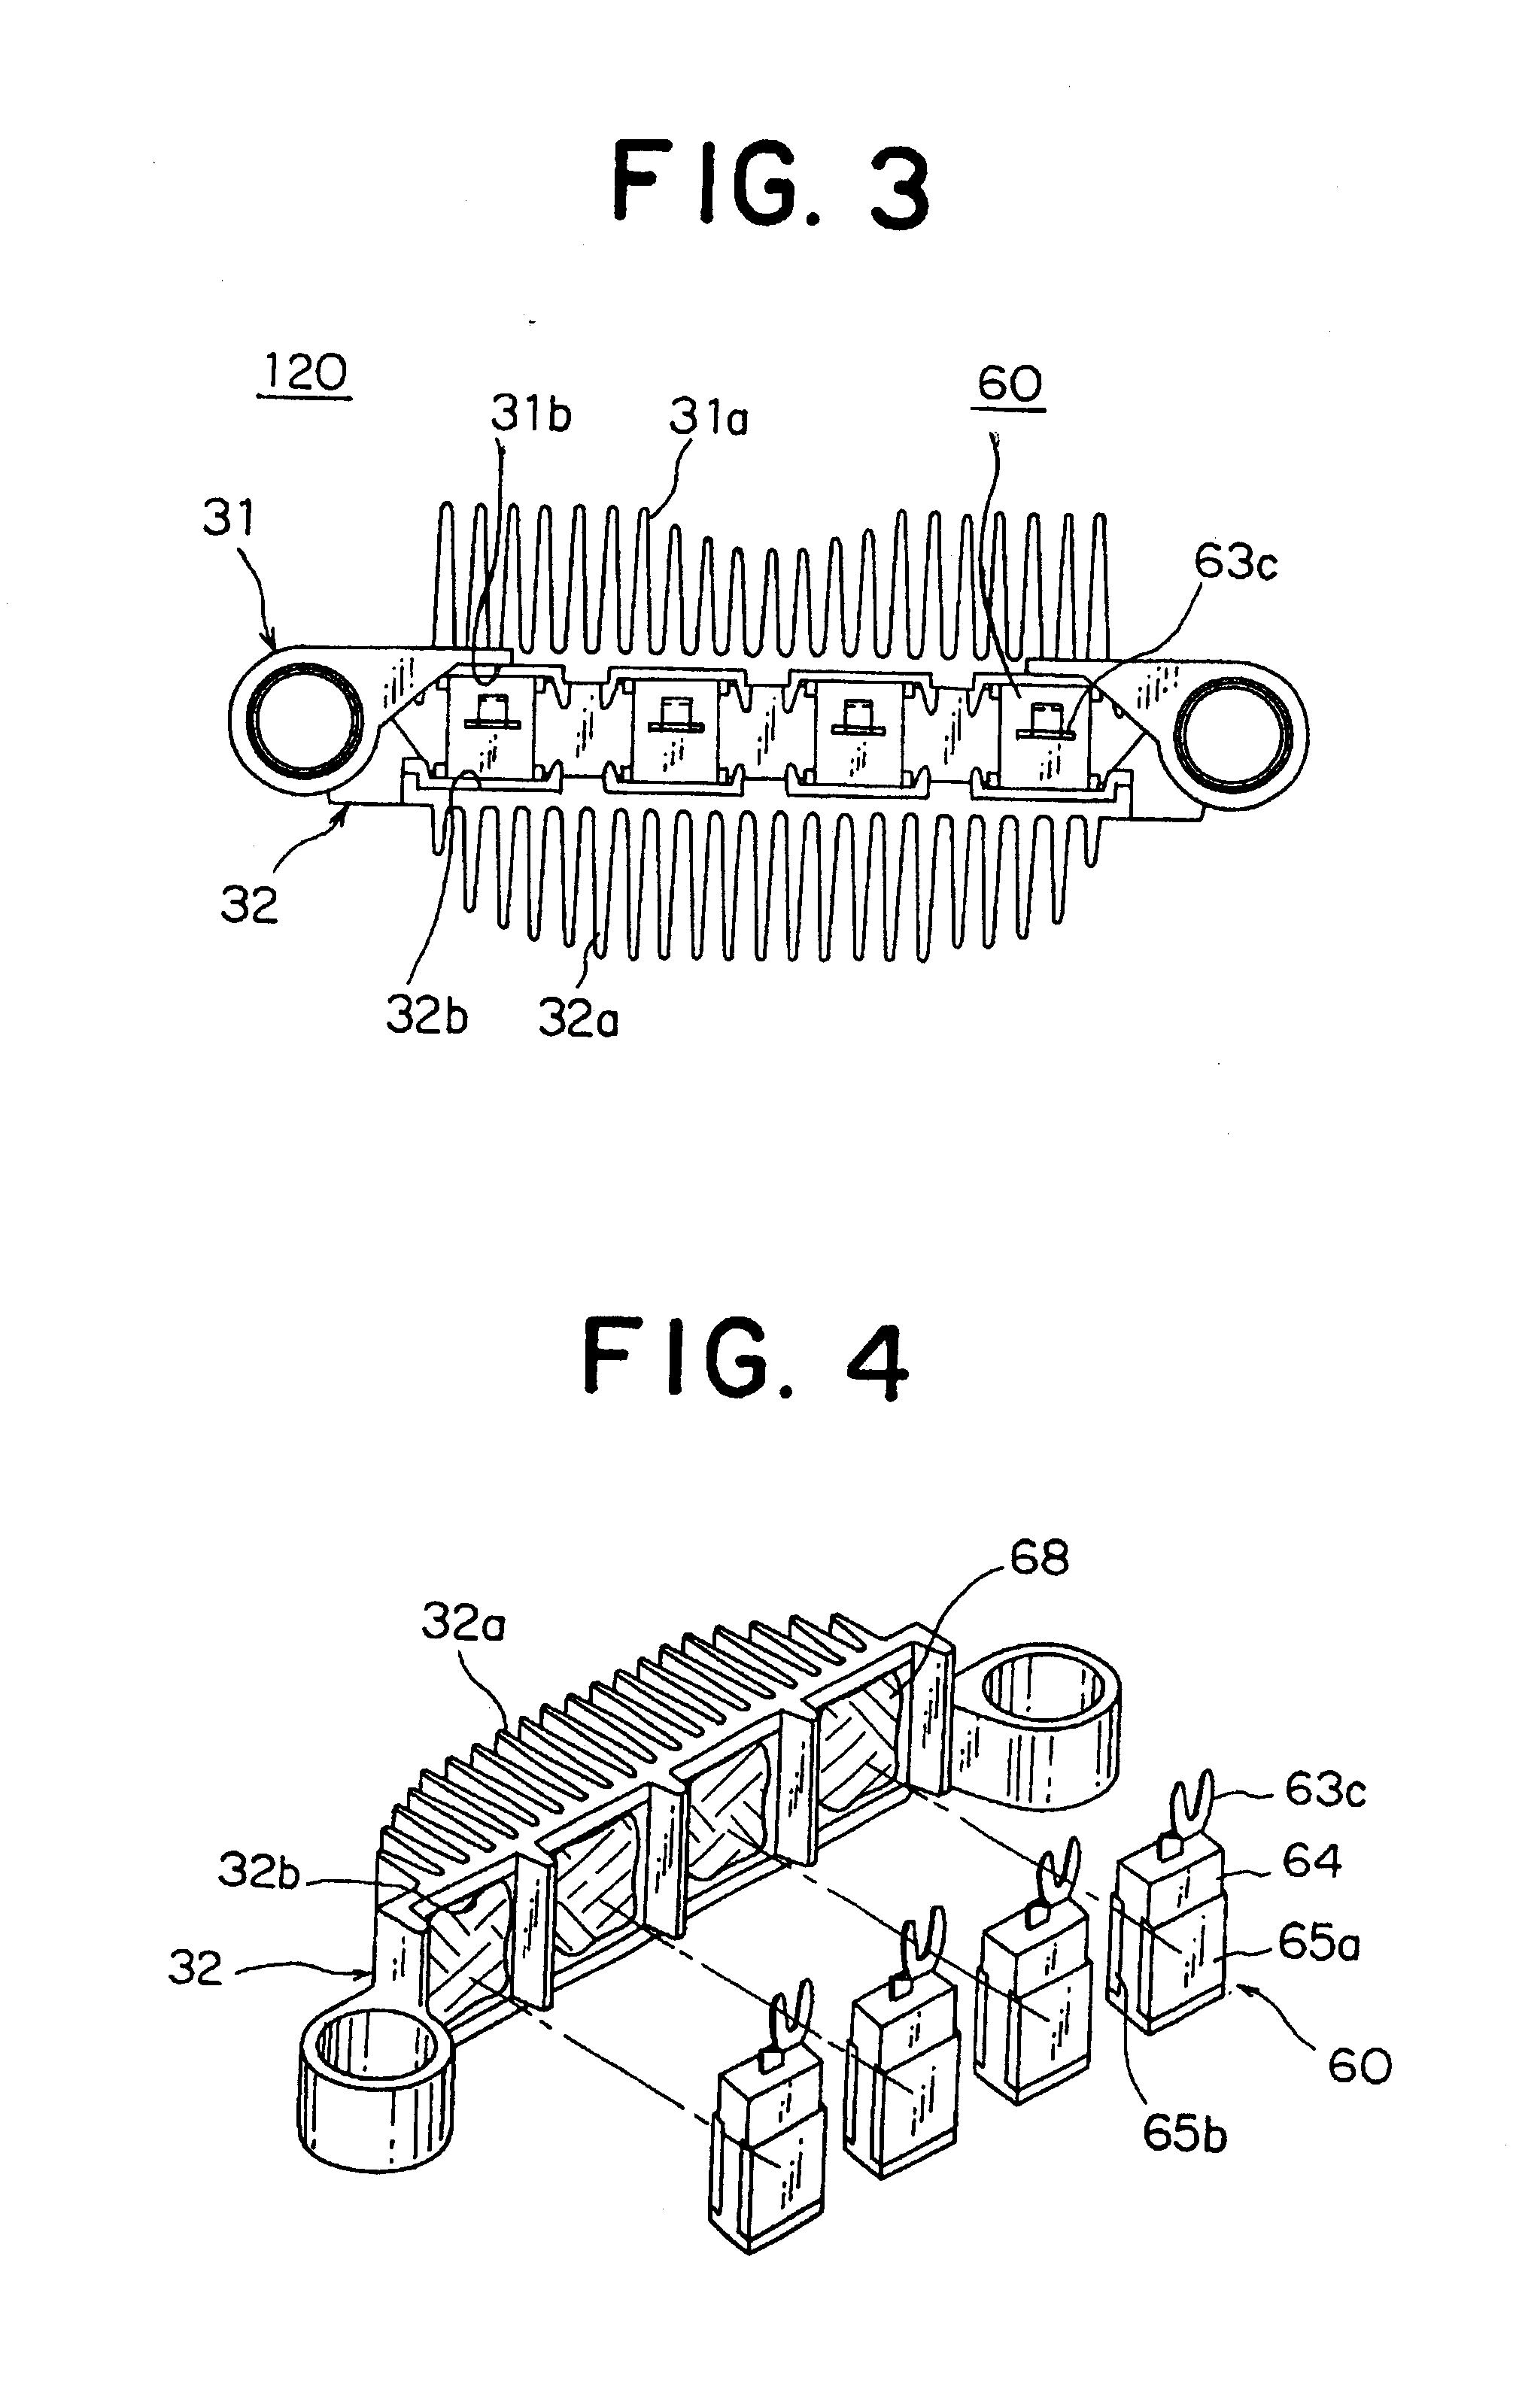 Vehicle AC generator with rectifier diode package disposed between cooling plates